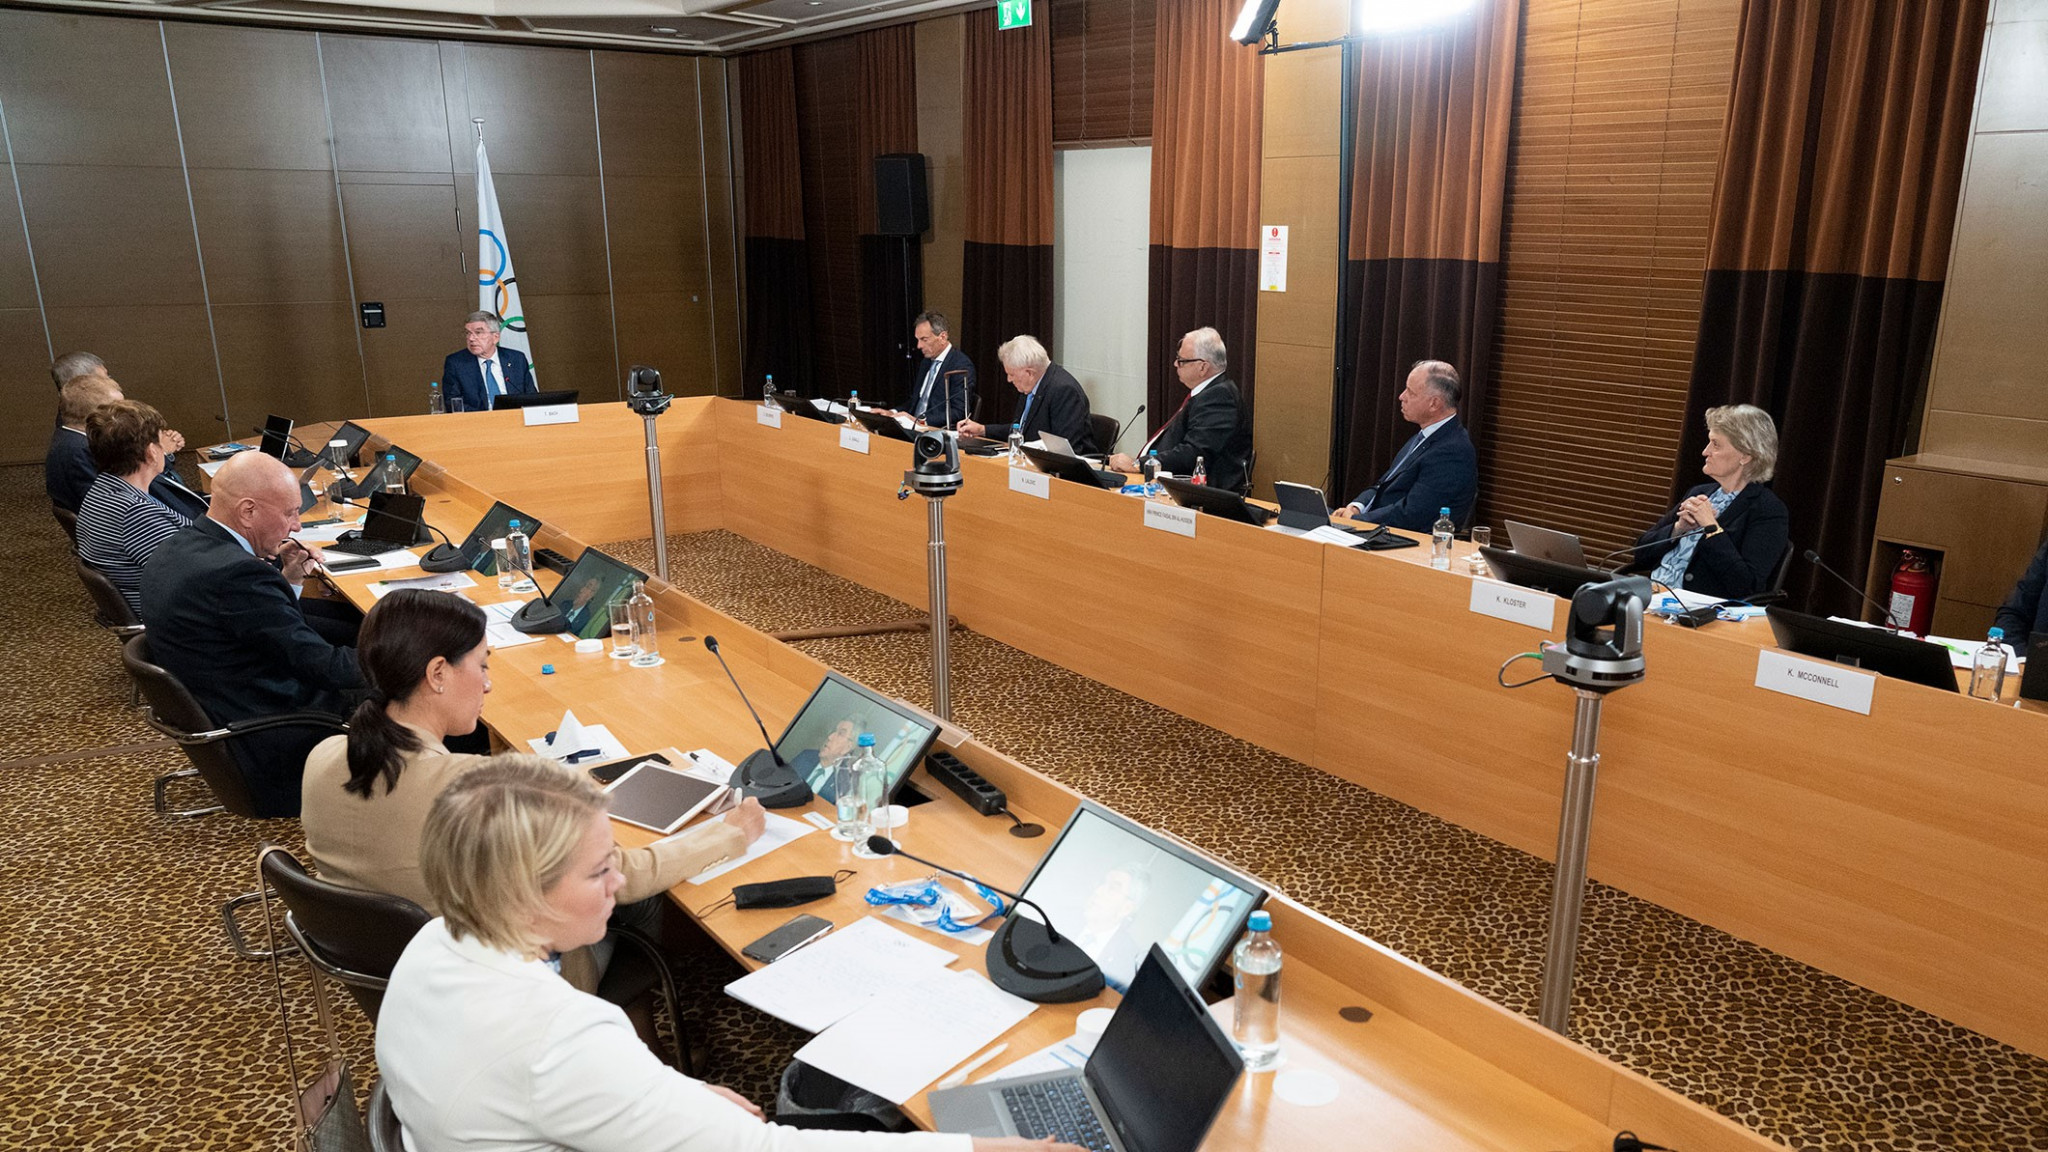 IOC Executive Board approve record number of candidatures for Athletes' Commission